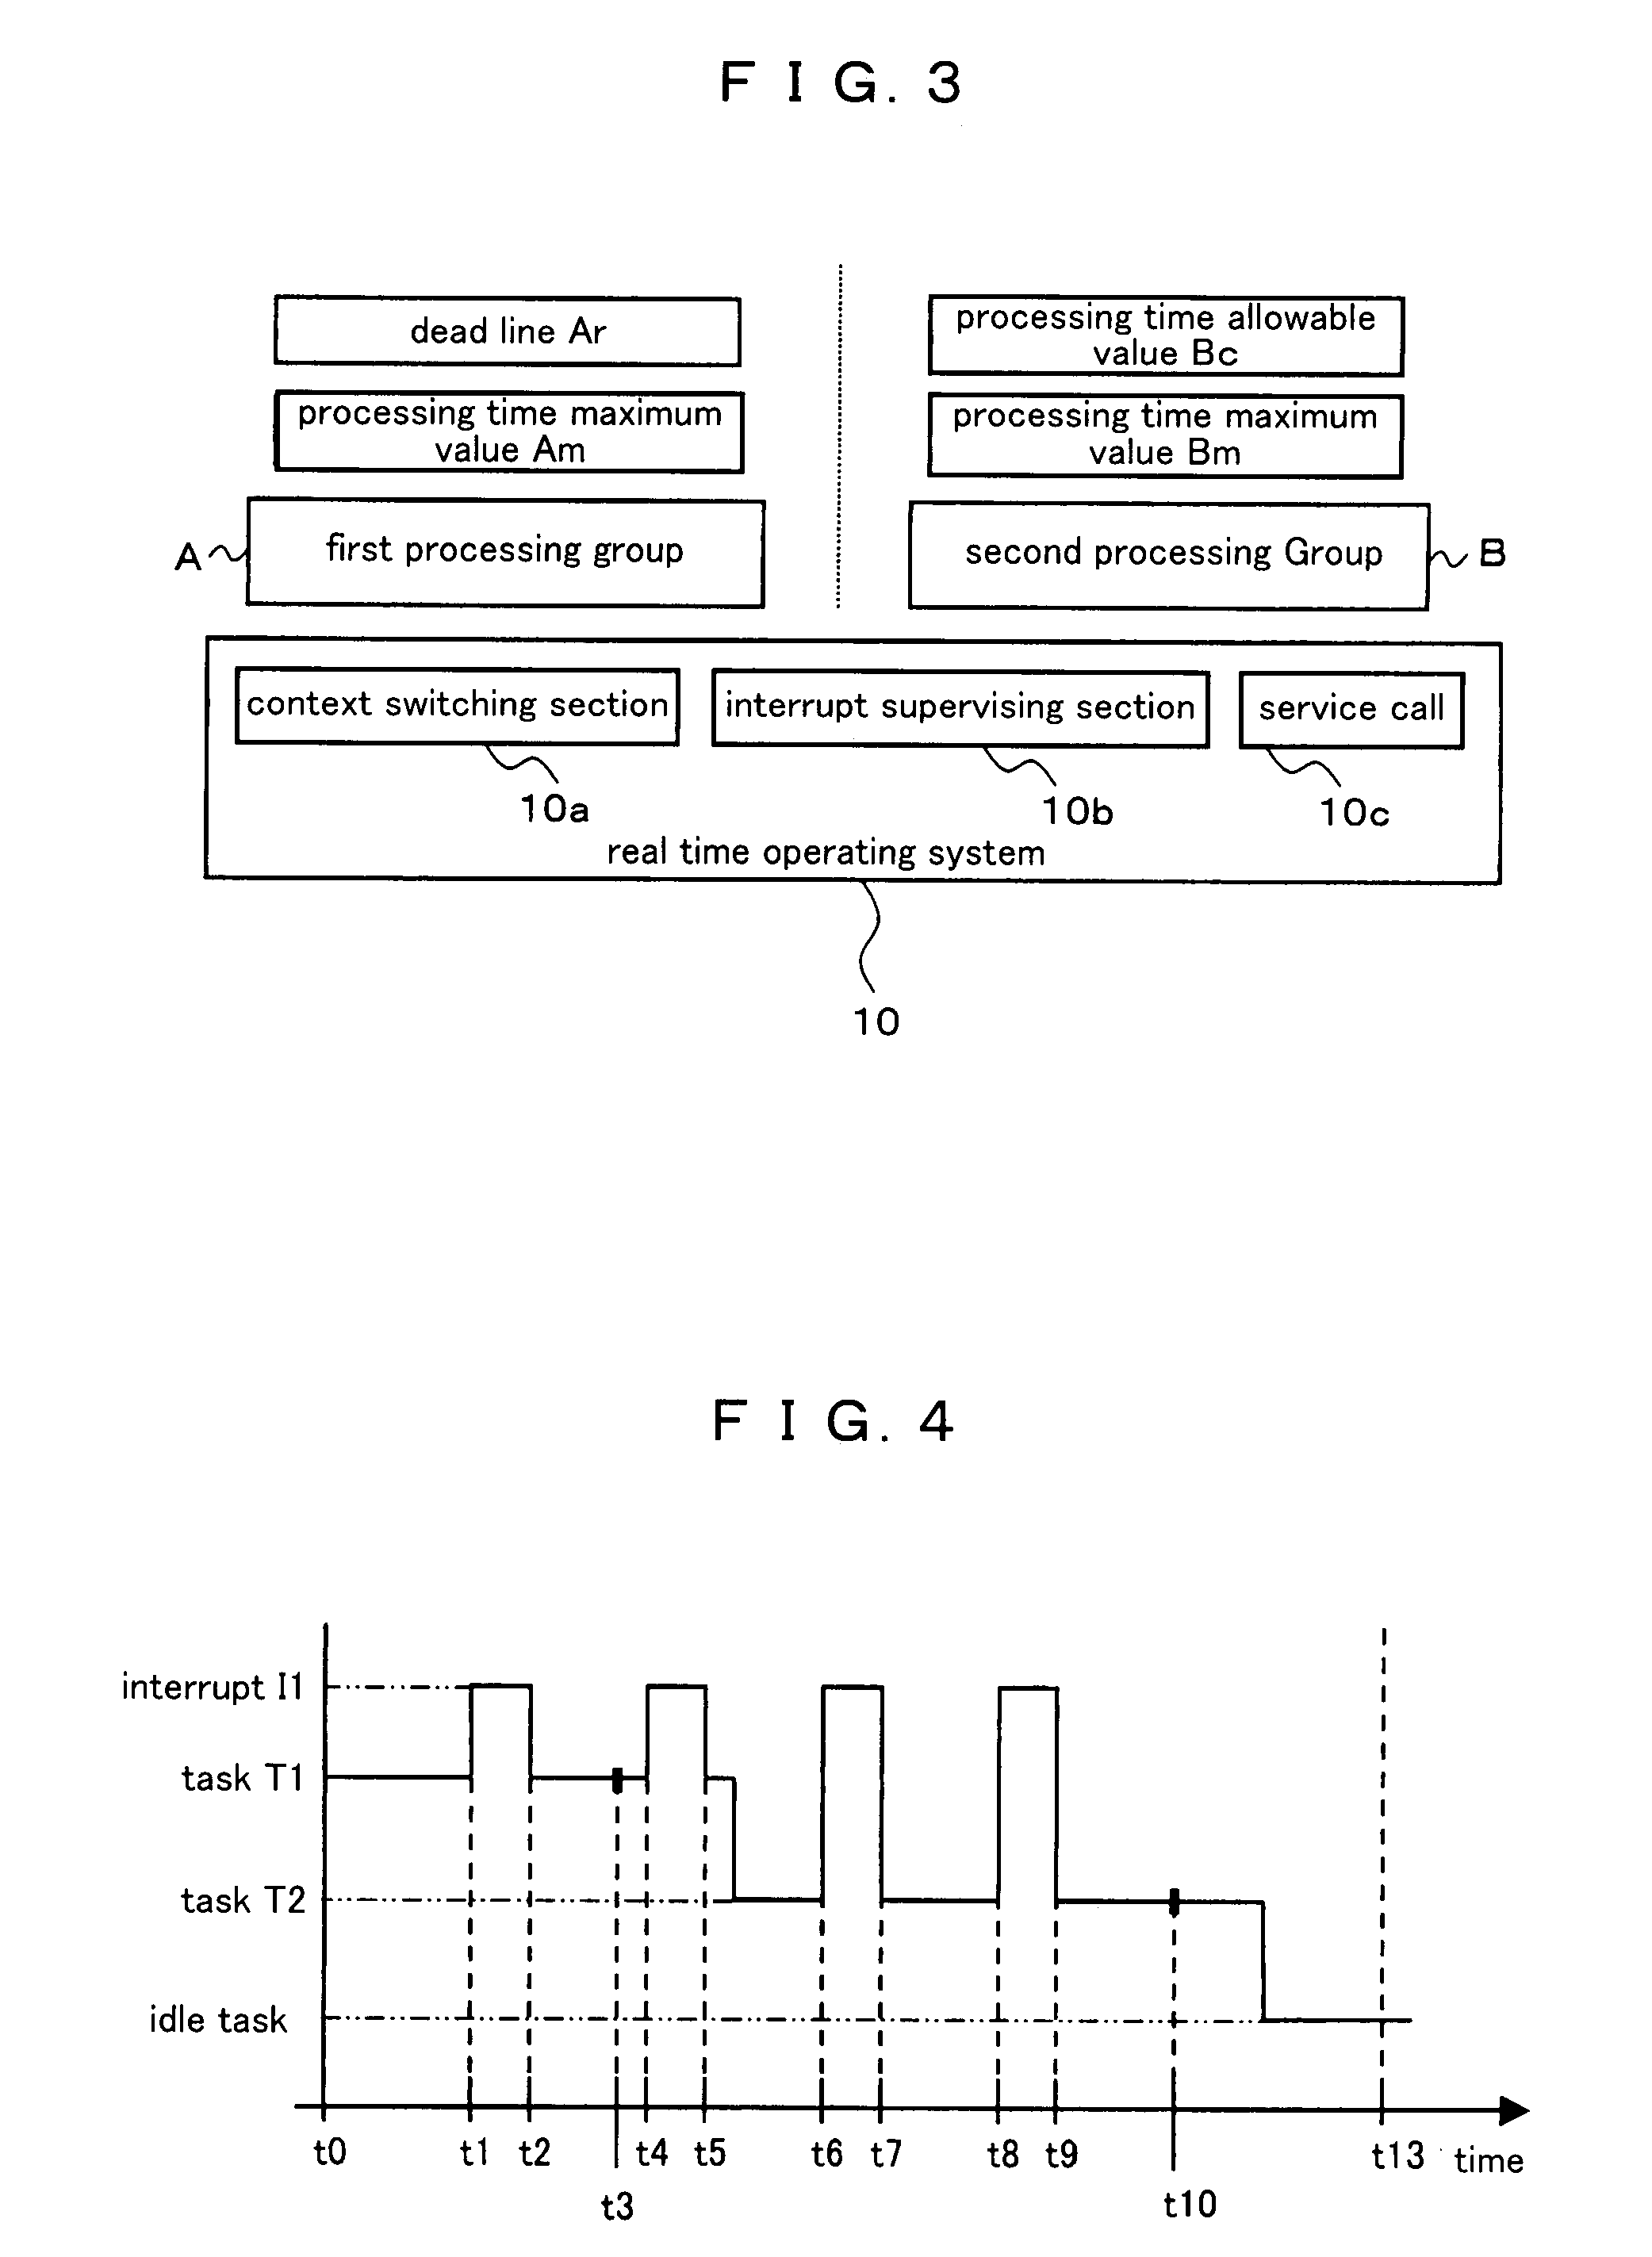 Method of processing time distribution in real time operating system